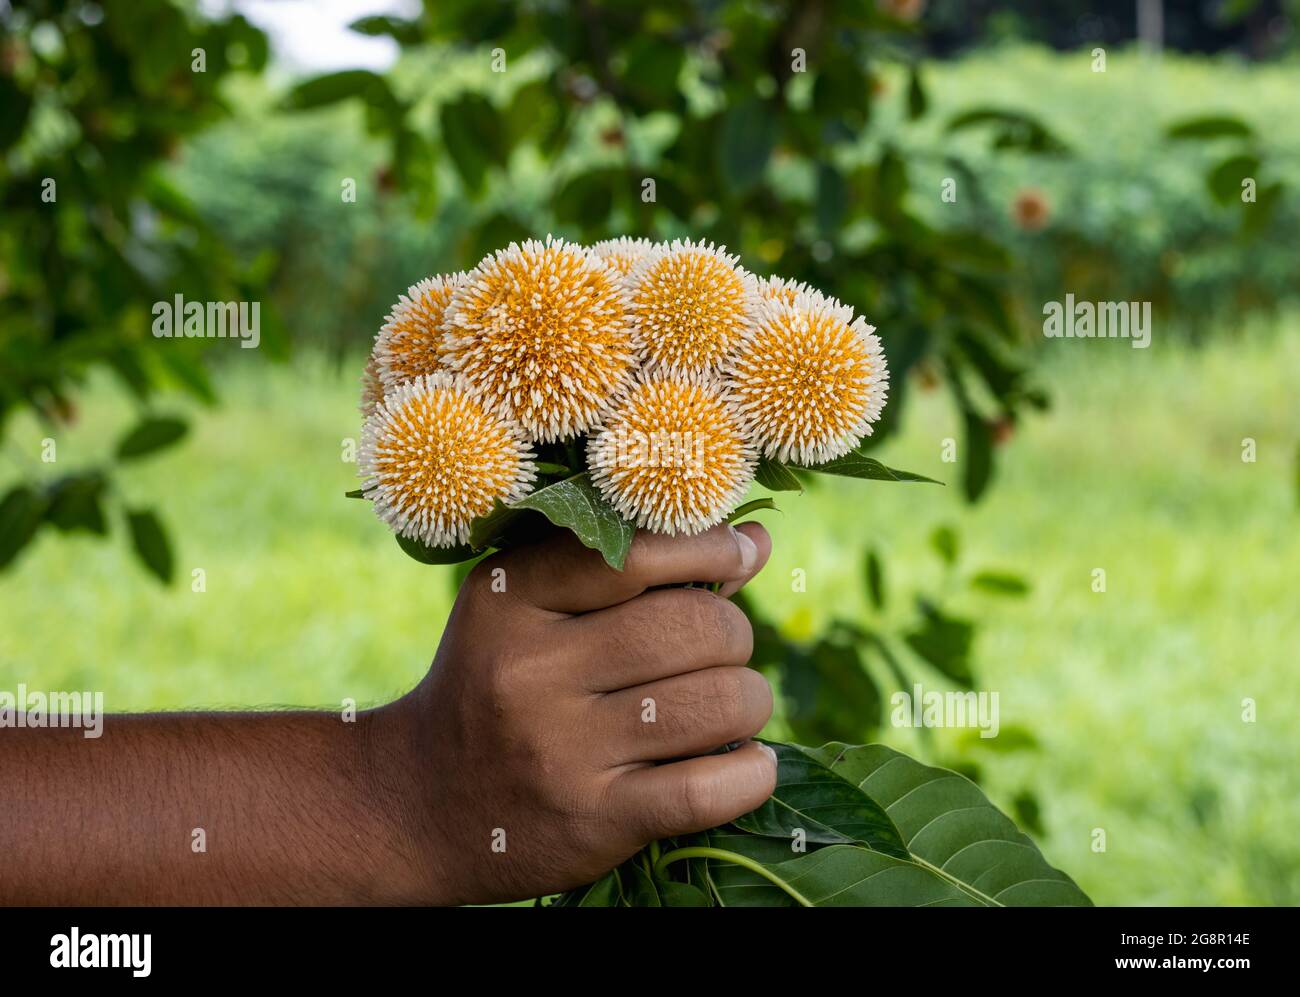 A bunch of leichhardt pine or Kadam flower on a hand close up Stock Photo